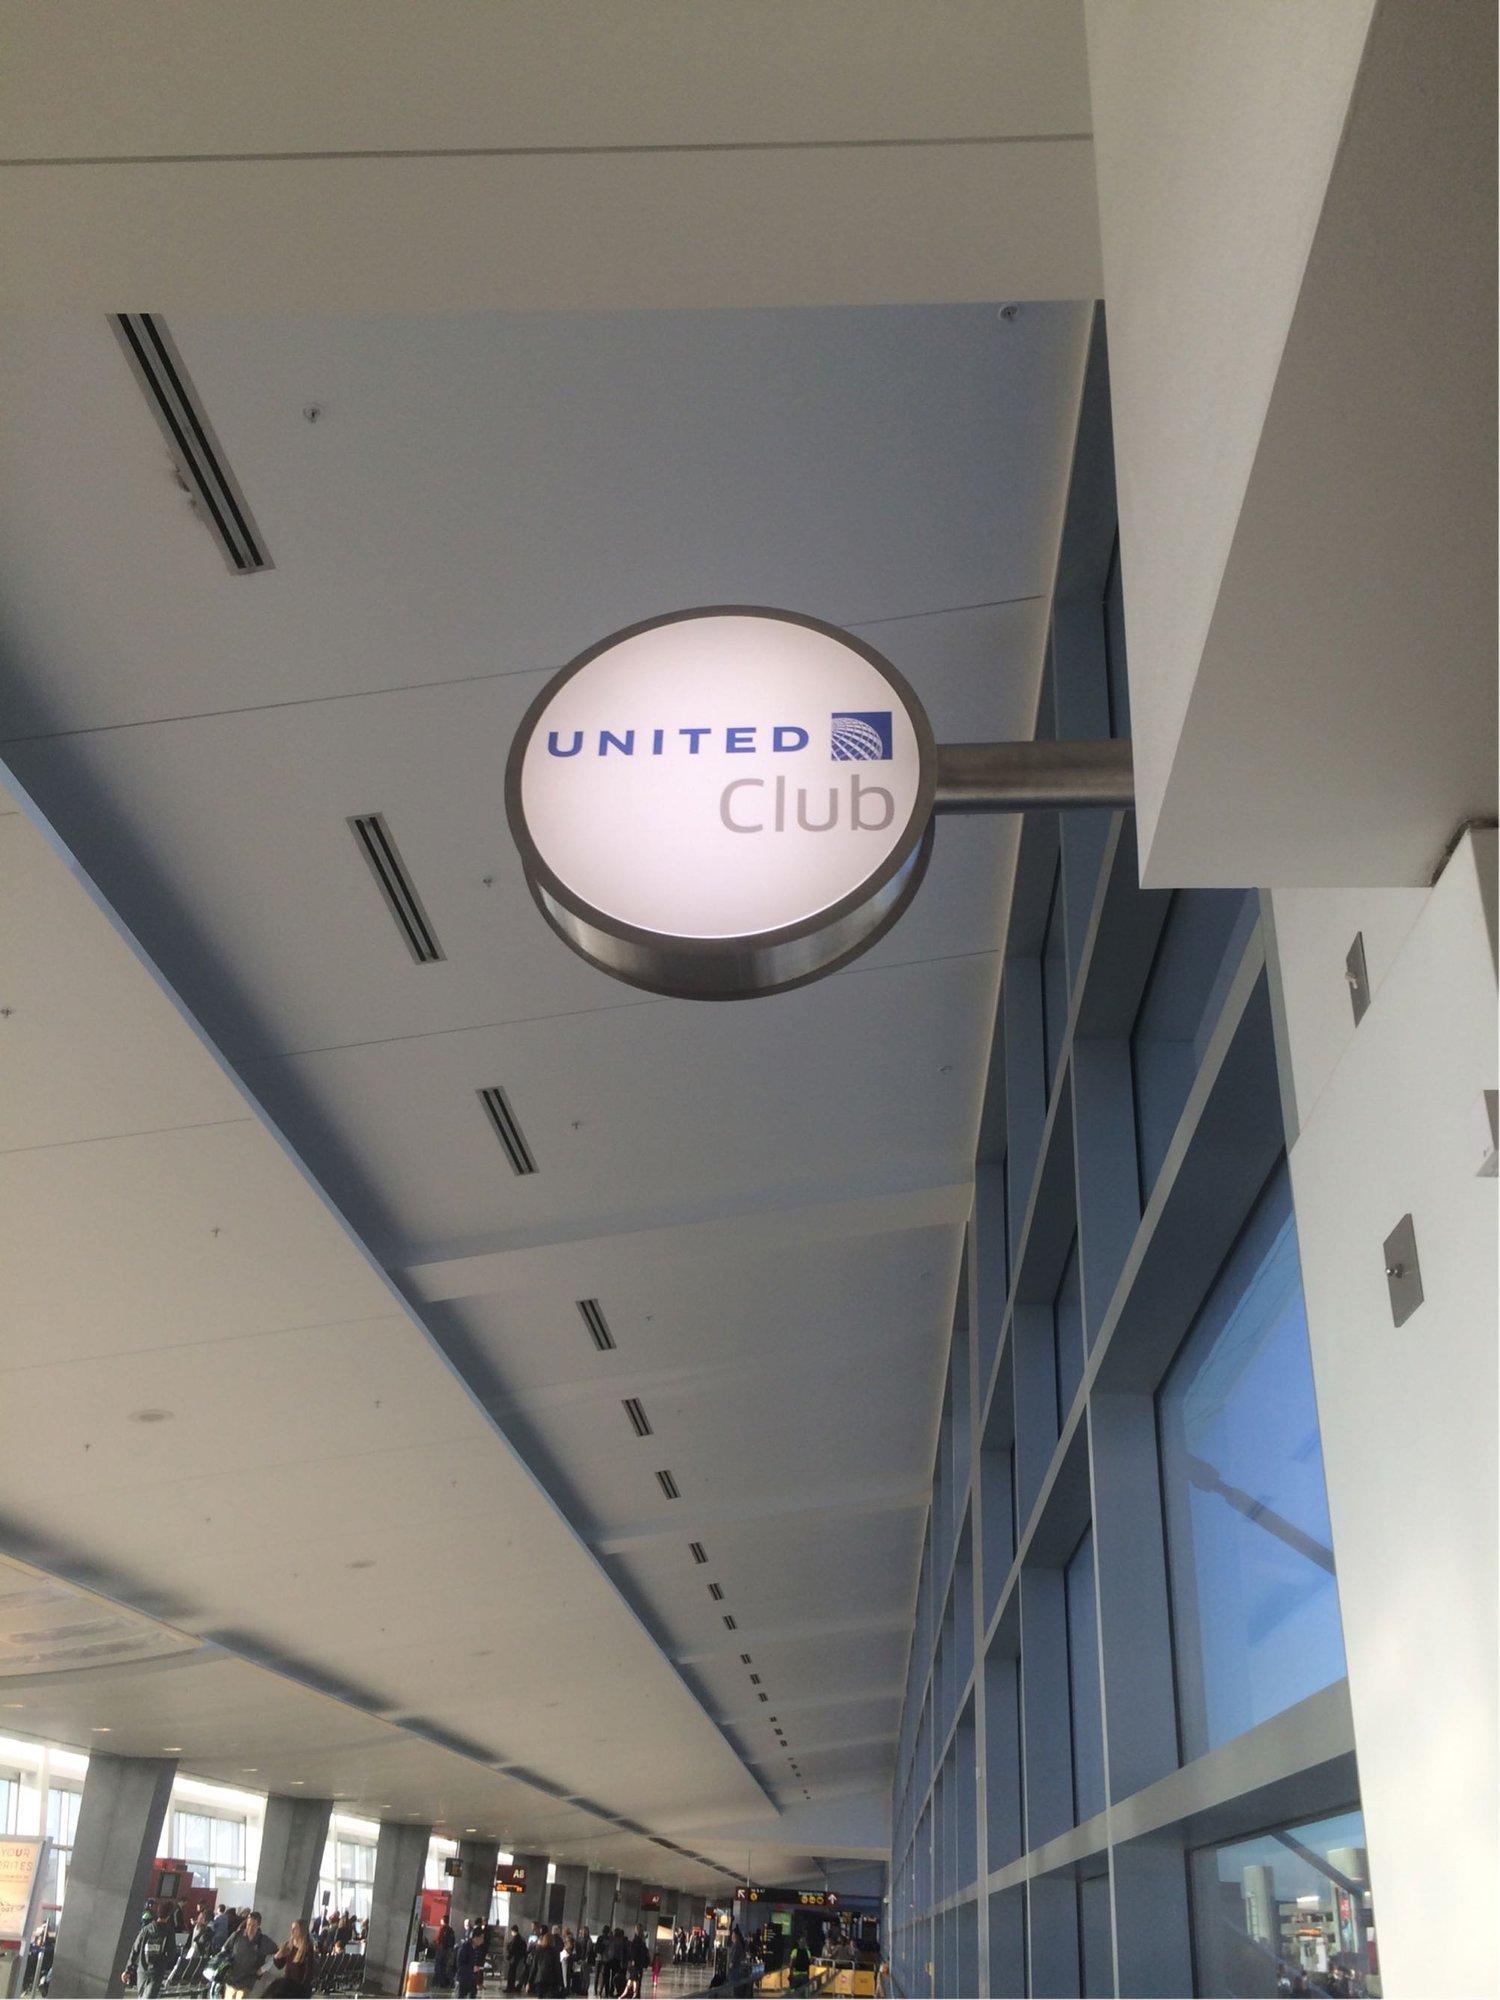 United Airlines United Club image 14 of 57